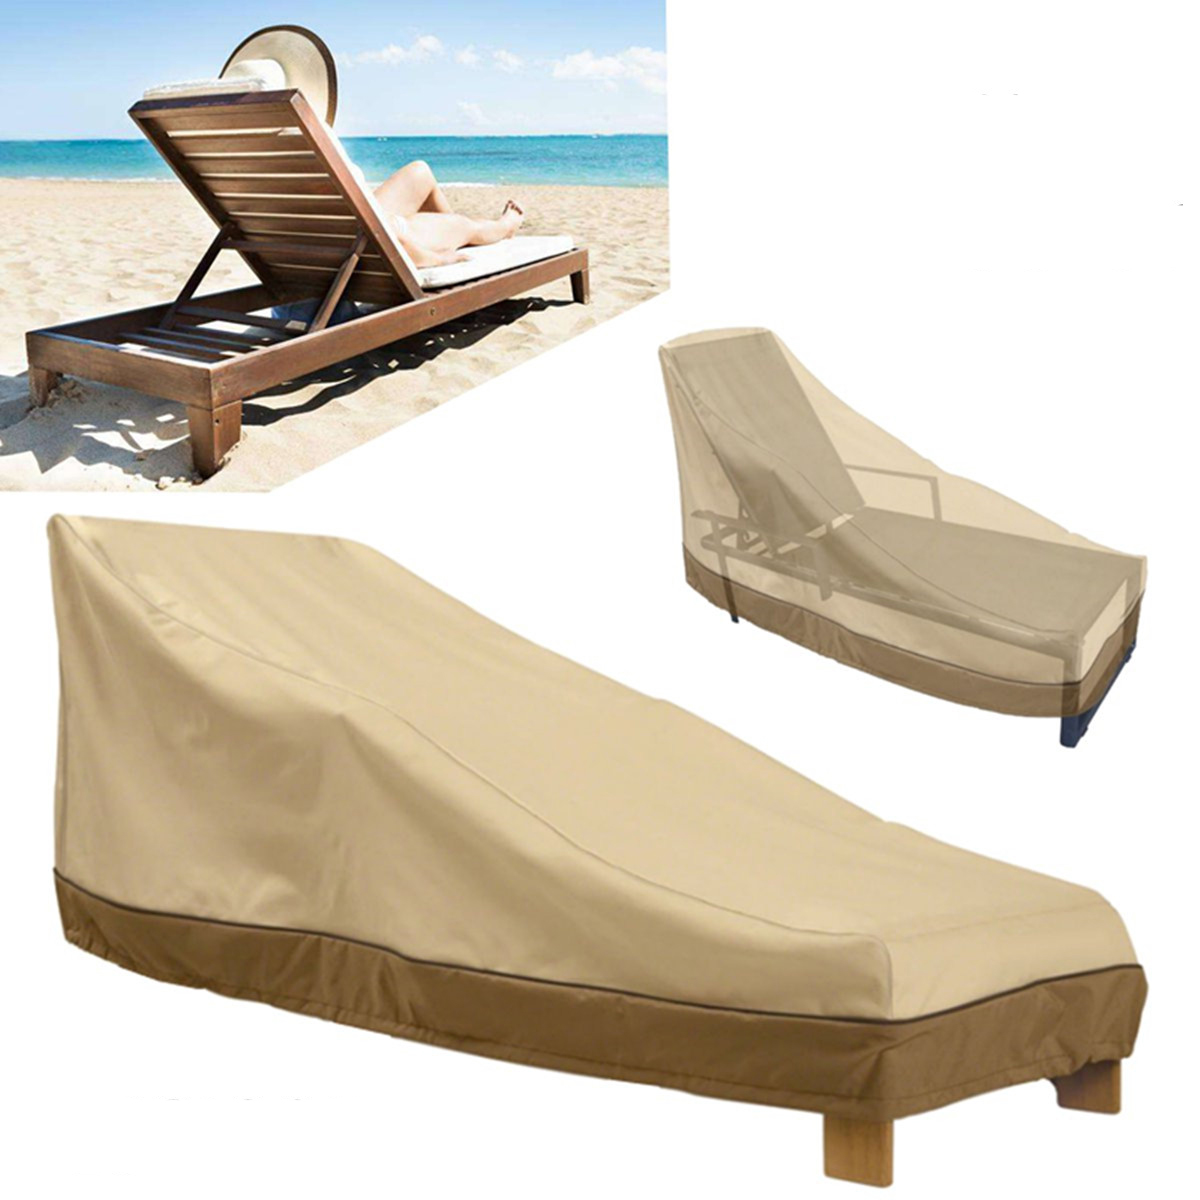 

Heavy Duty Outdoor Furniture Waterproof Cover Garden Patio Yard Chaise Lounge Dust Rain Shelter Protector